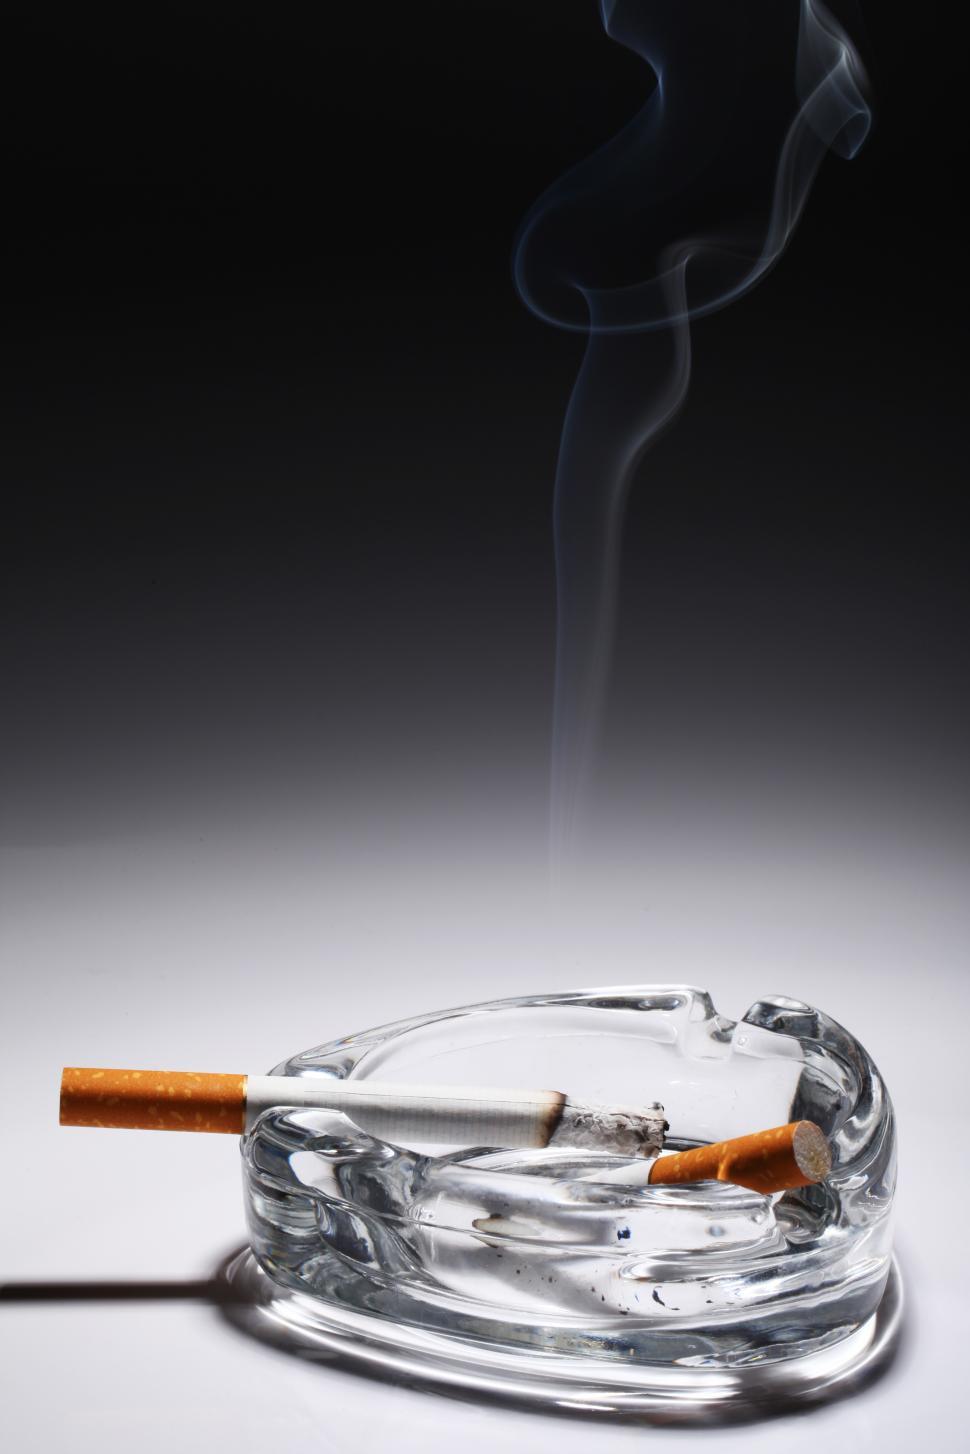 Free Image of Cigarette smolders in the glass ashtray 